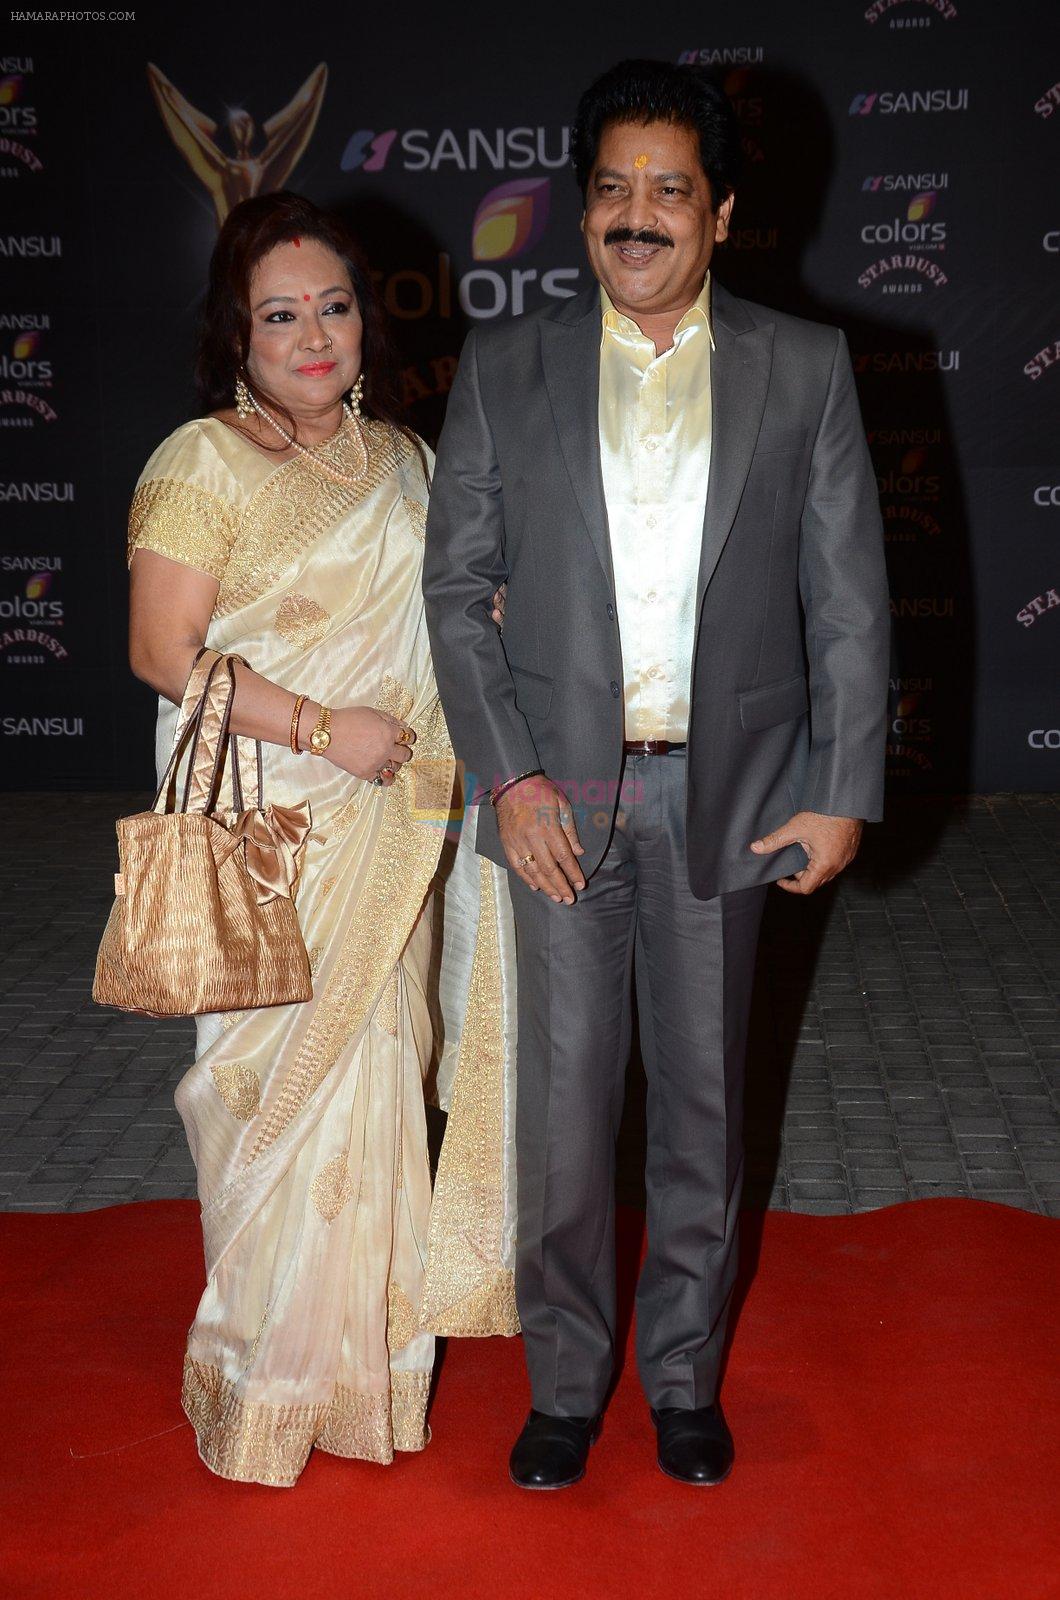 Udit Narayan at the red carpet of Stardust awards on 21st Dec 2015